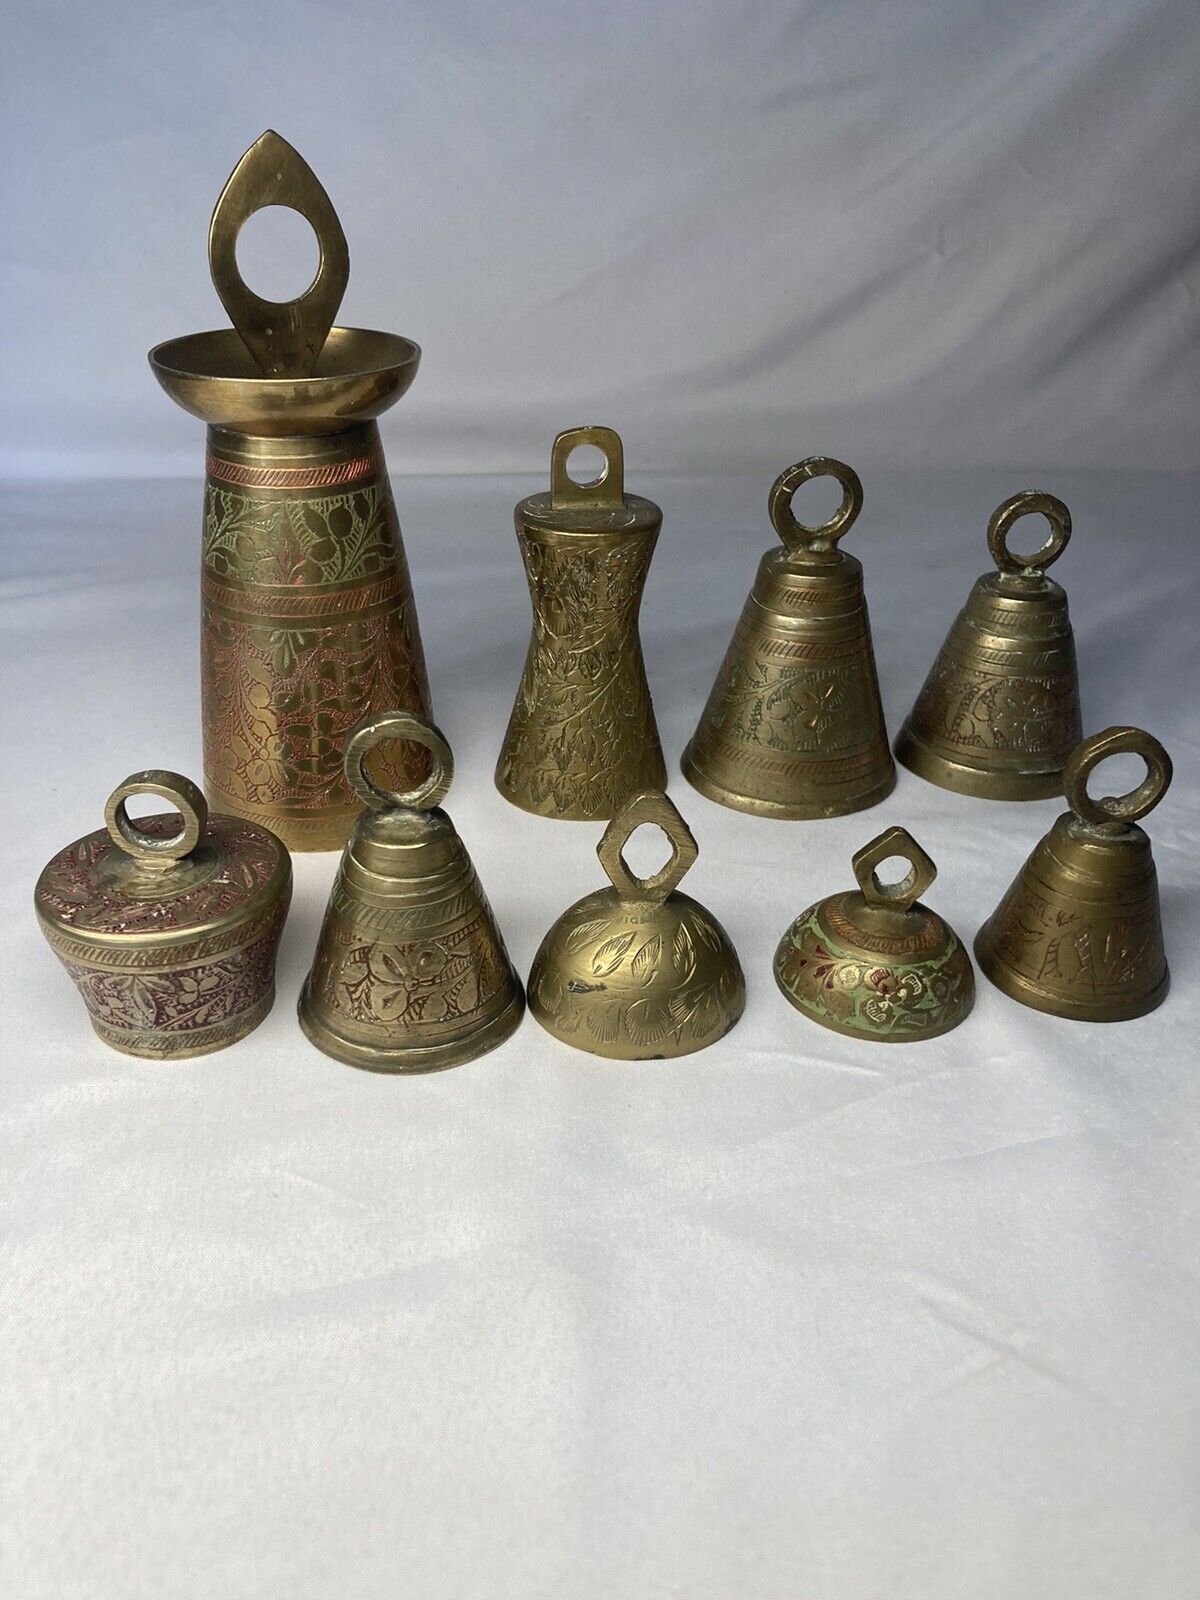 Collection of 9 Vintage Antique Brass Bronze Bells Possibly From India